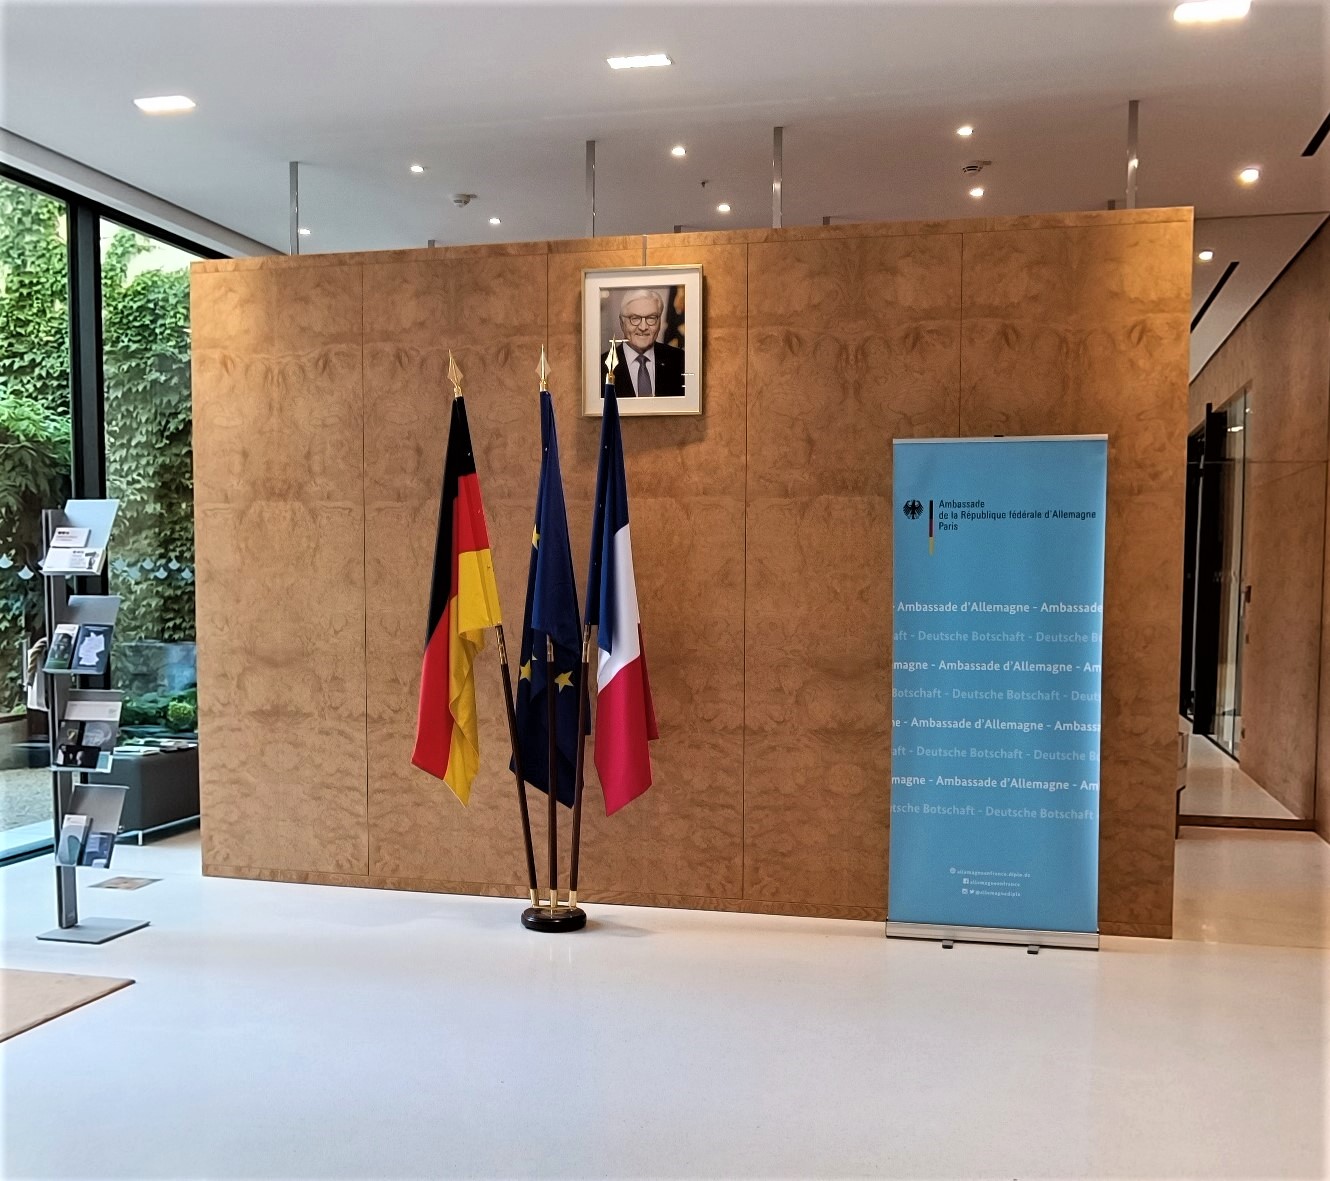 “Research in Germany” networking event at the German Embassy in Paris